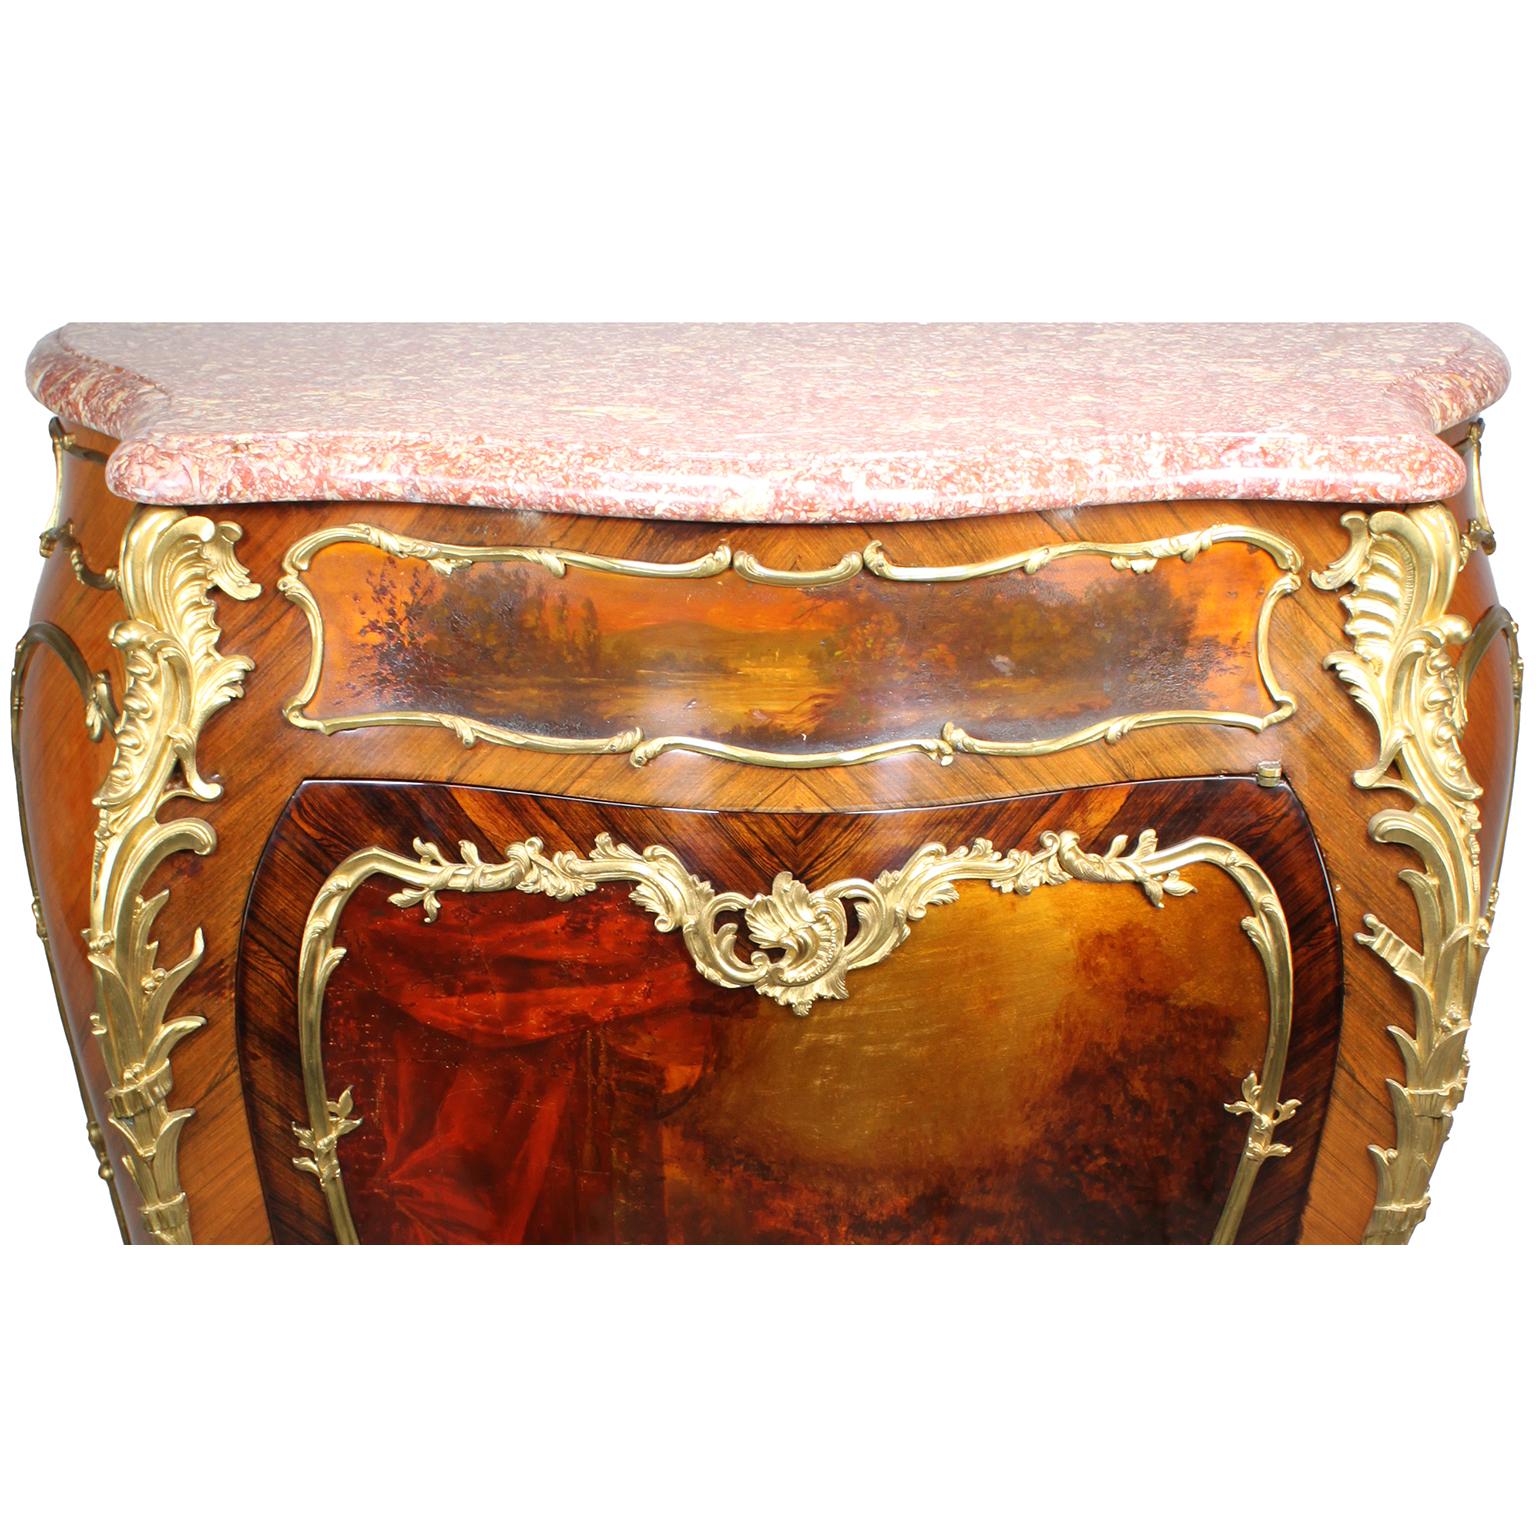 Gilt French 19th Century Louis XV Style Ormolu Mounted Kingwood Vernis-Martin Cabinet For Sale